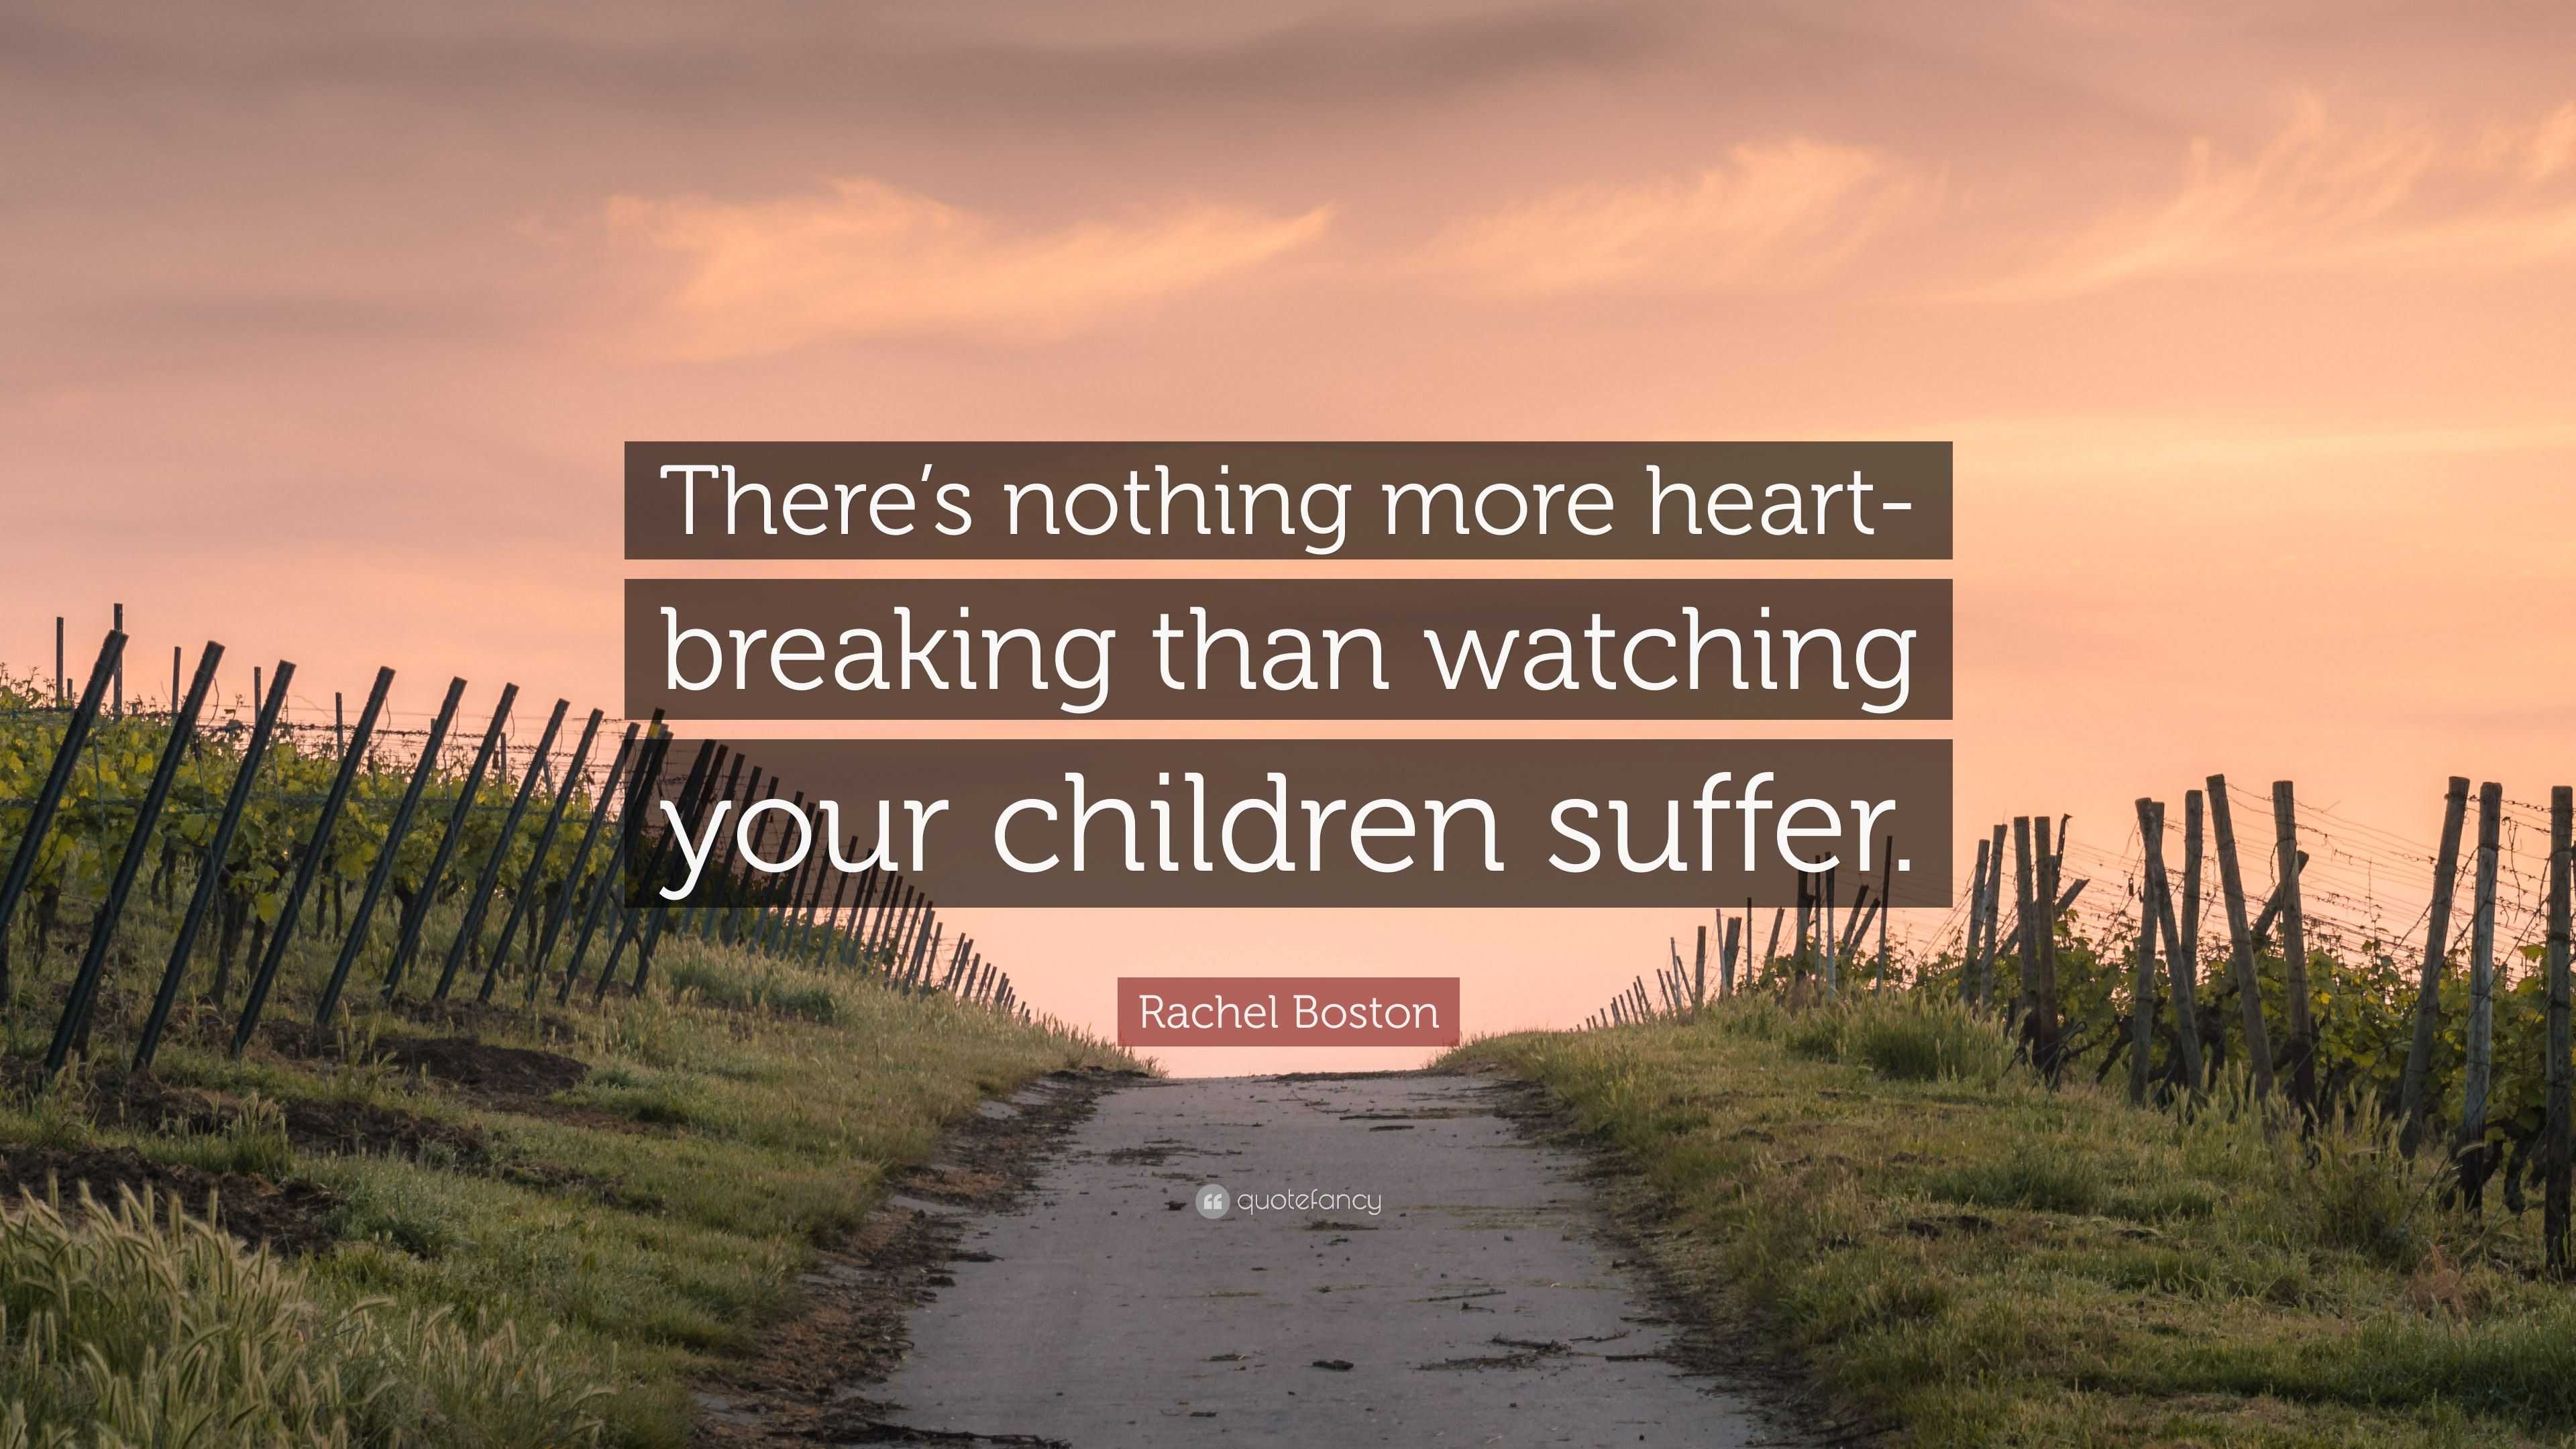 Rachel Boston Quote: "There's nothing more heart-breaking than watching your children suffer ...